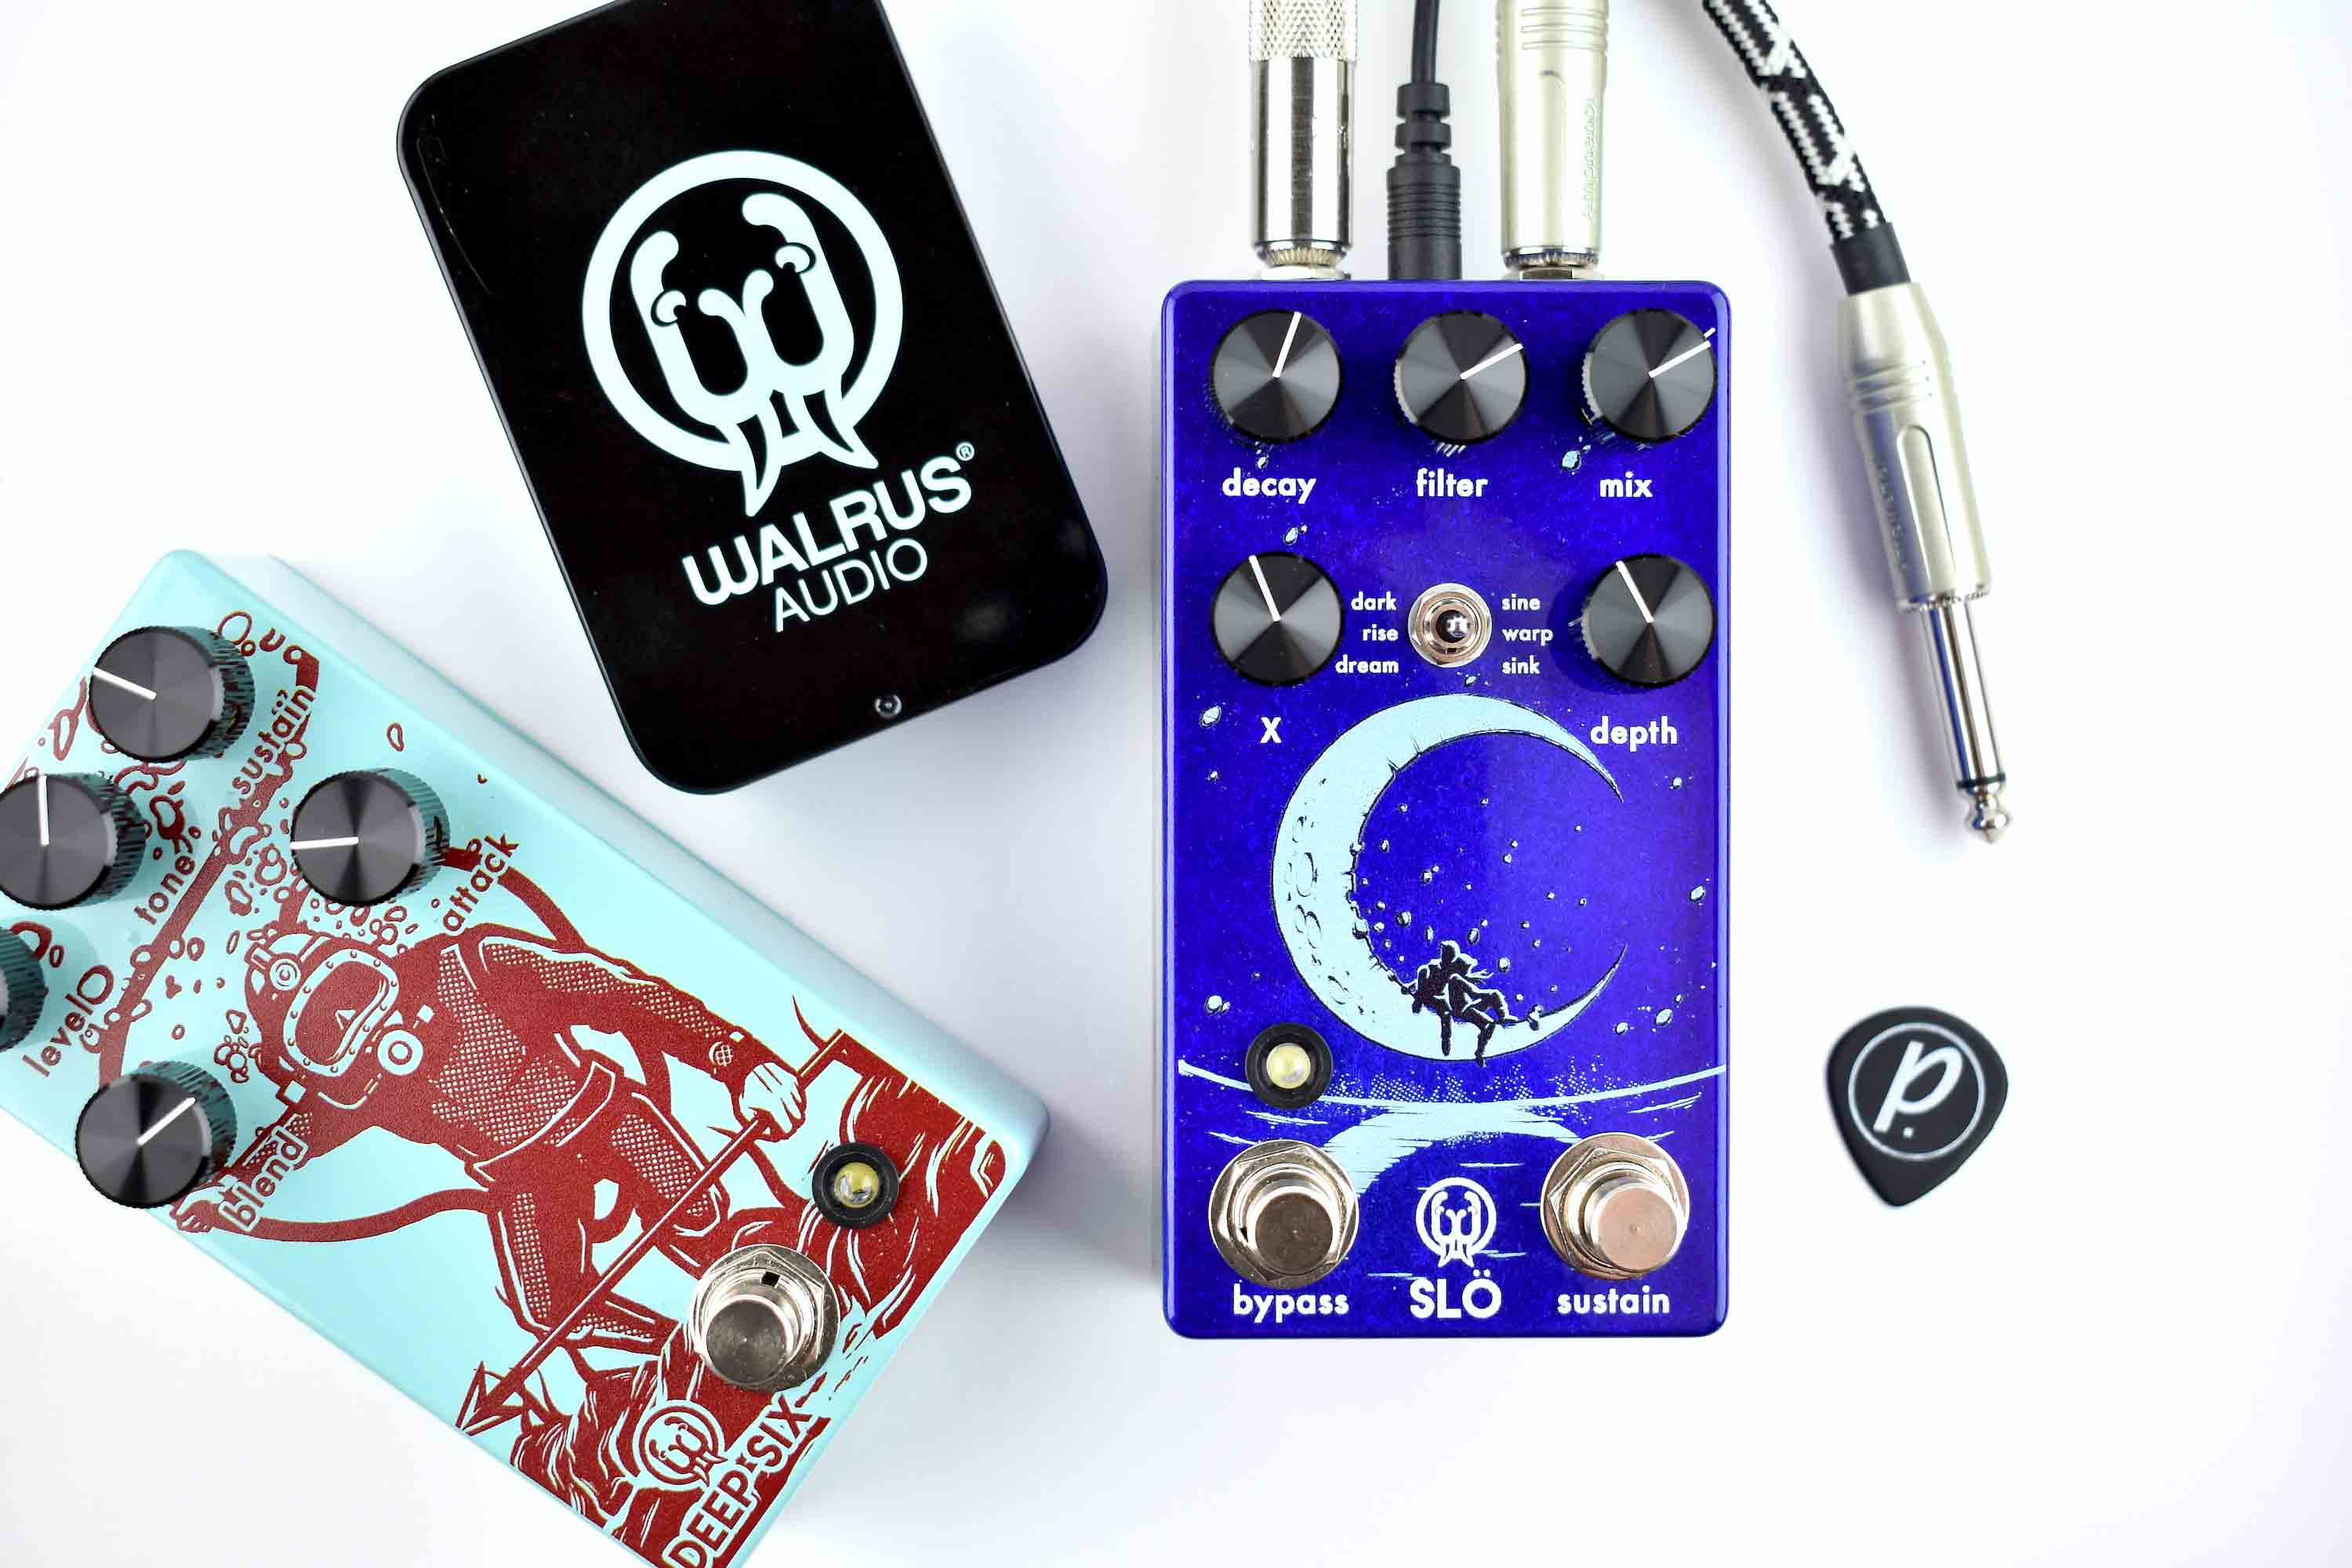 Walrus Audio Slö Multi Texture Reverb - Pedal of the Day